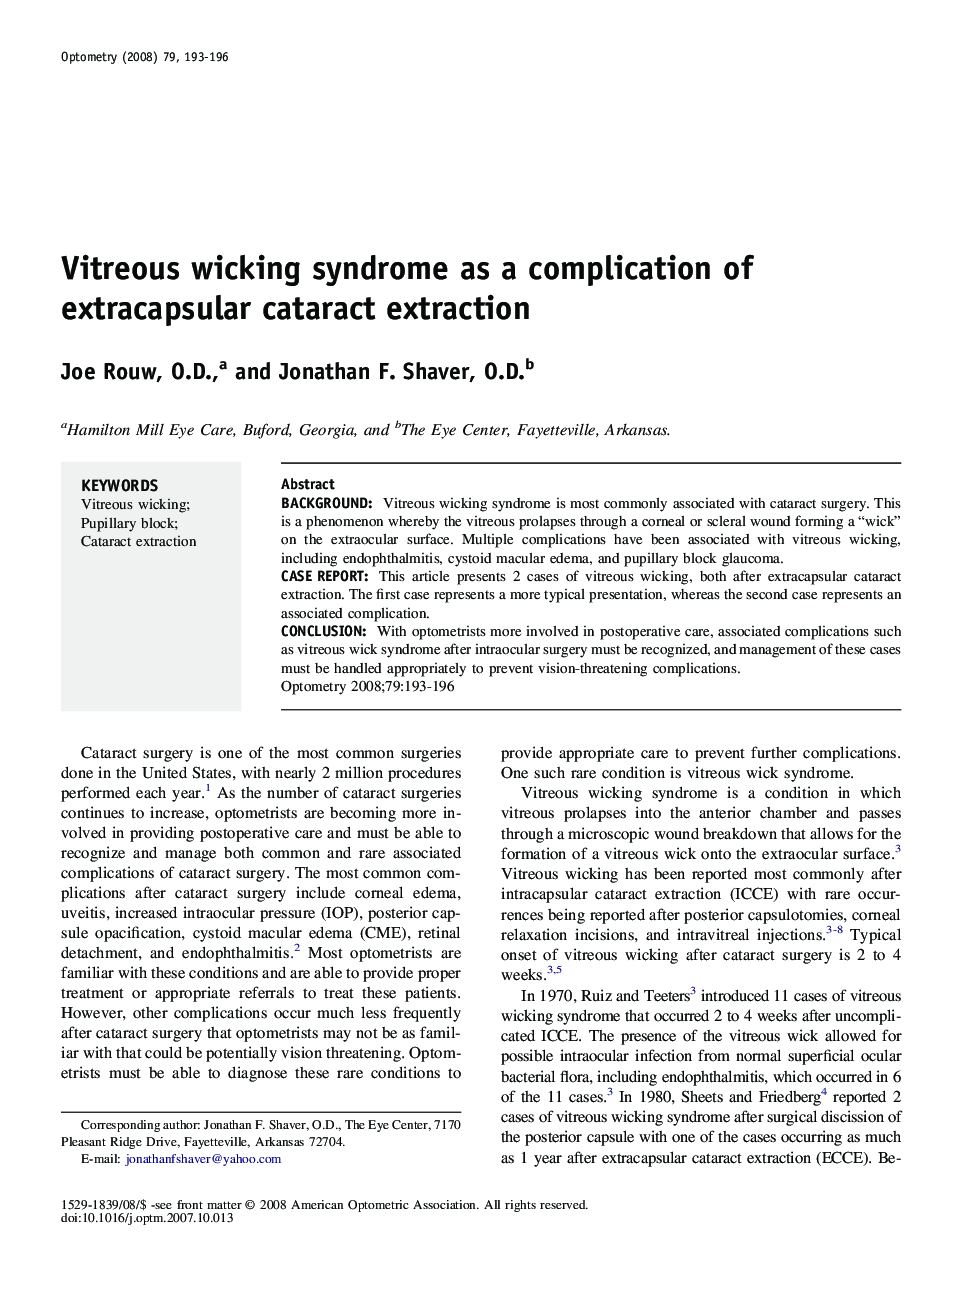 Vitreous wicking syndrome as a complication of extracapsular cataract extraction